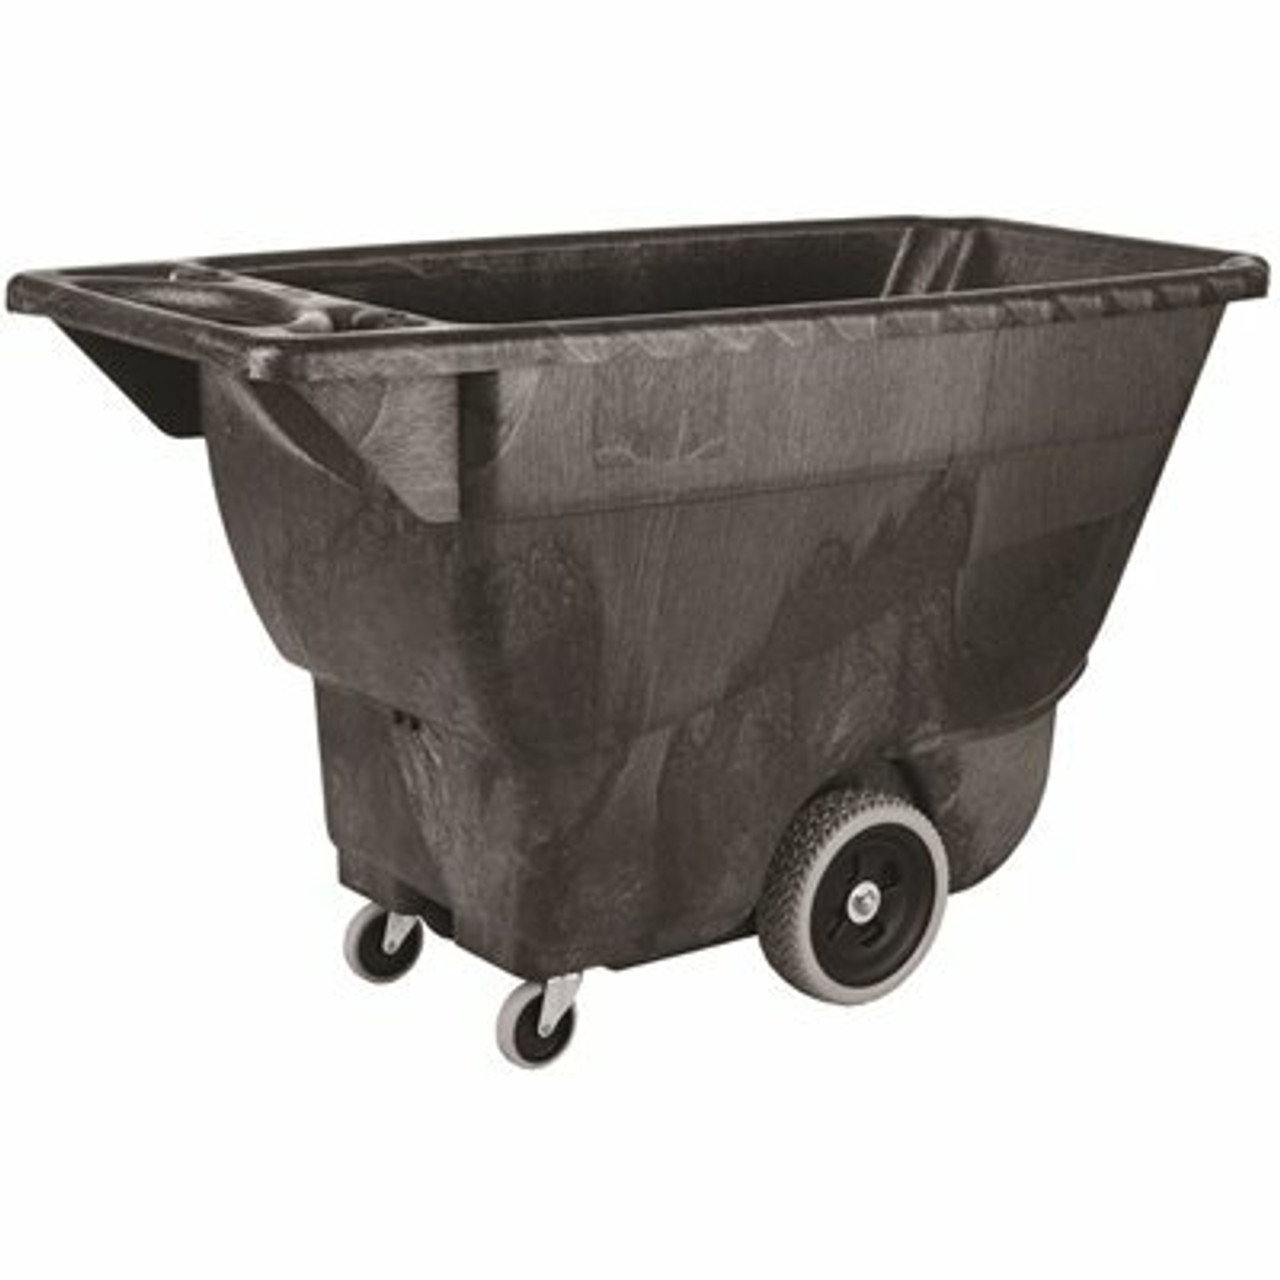 Rubbermaid Commercial Products 1/2 Cu. Yd. Capacity Black Structural Foam Utility Duty Tilt Truck